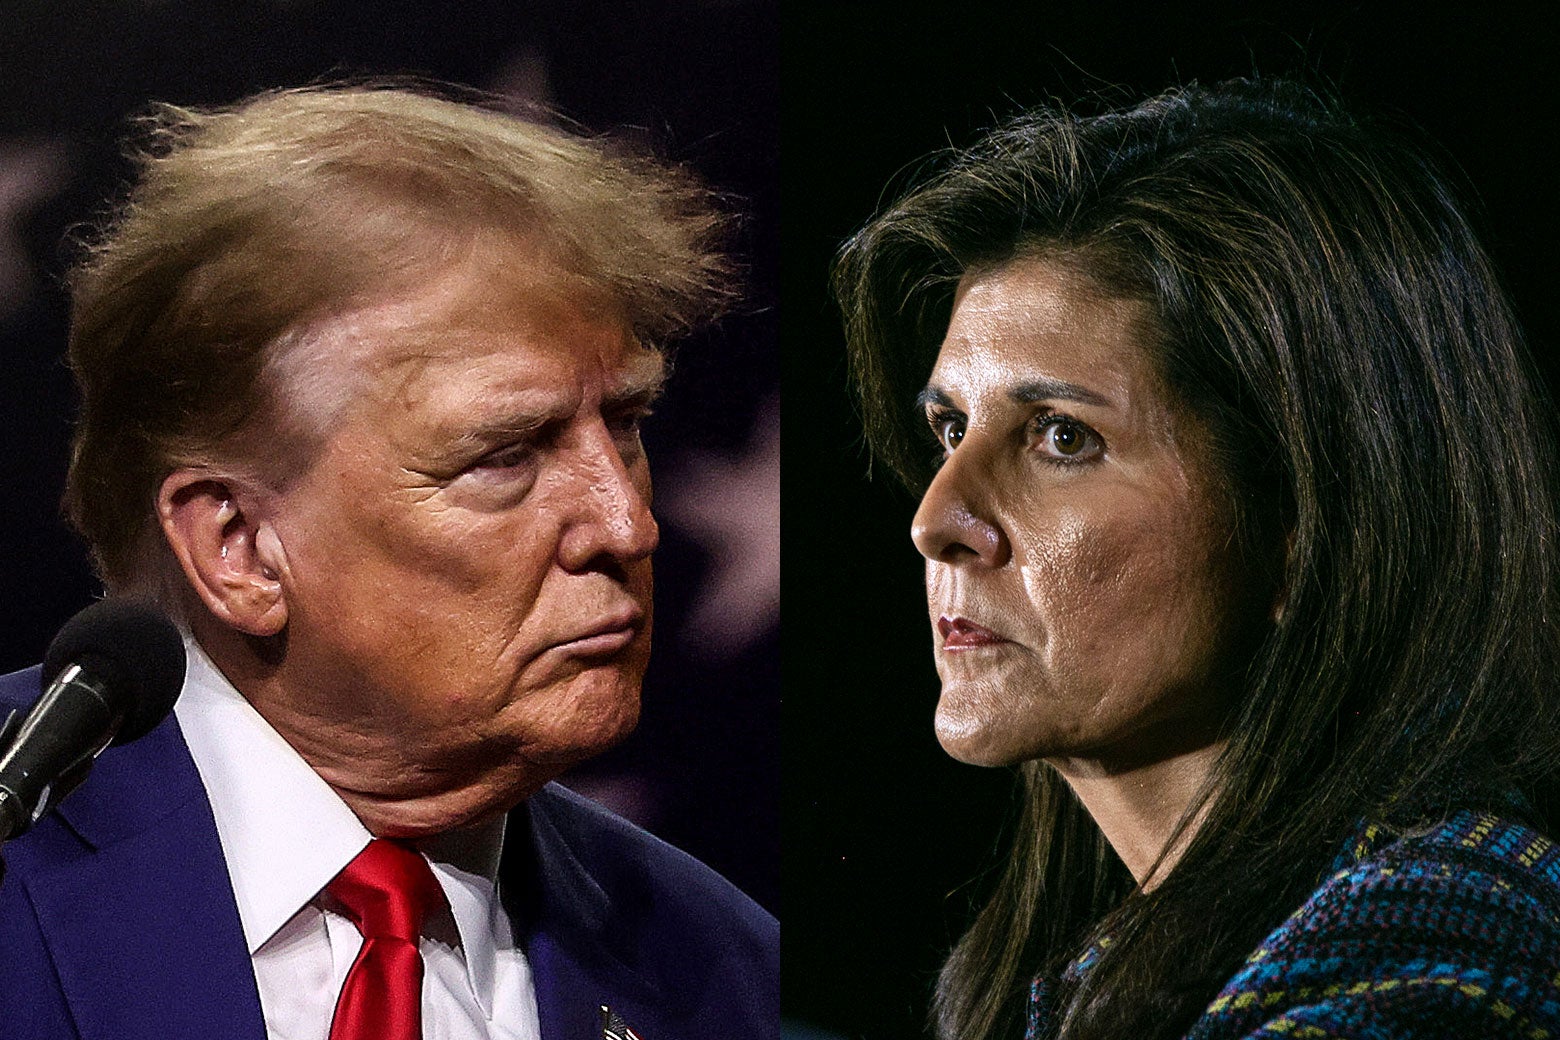 A split-screen with a photo of Donald Trump looking to the right, and Nikki Haley looking to the left.